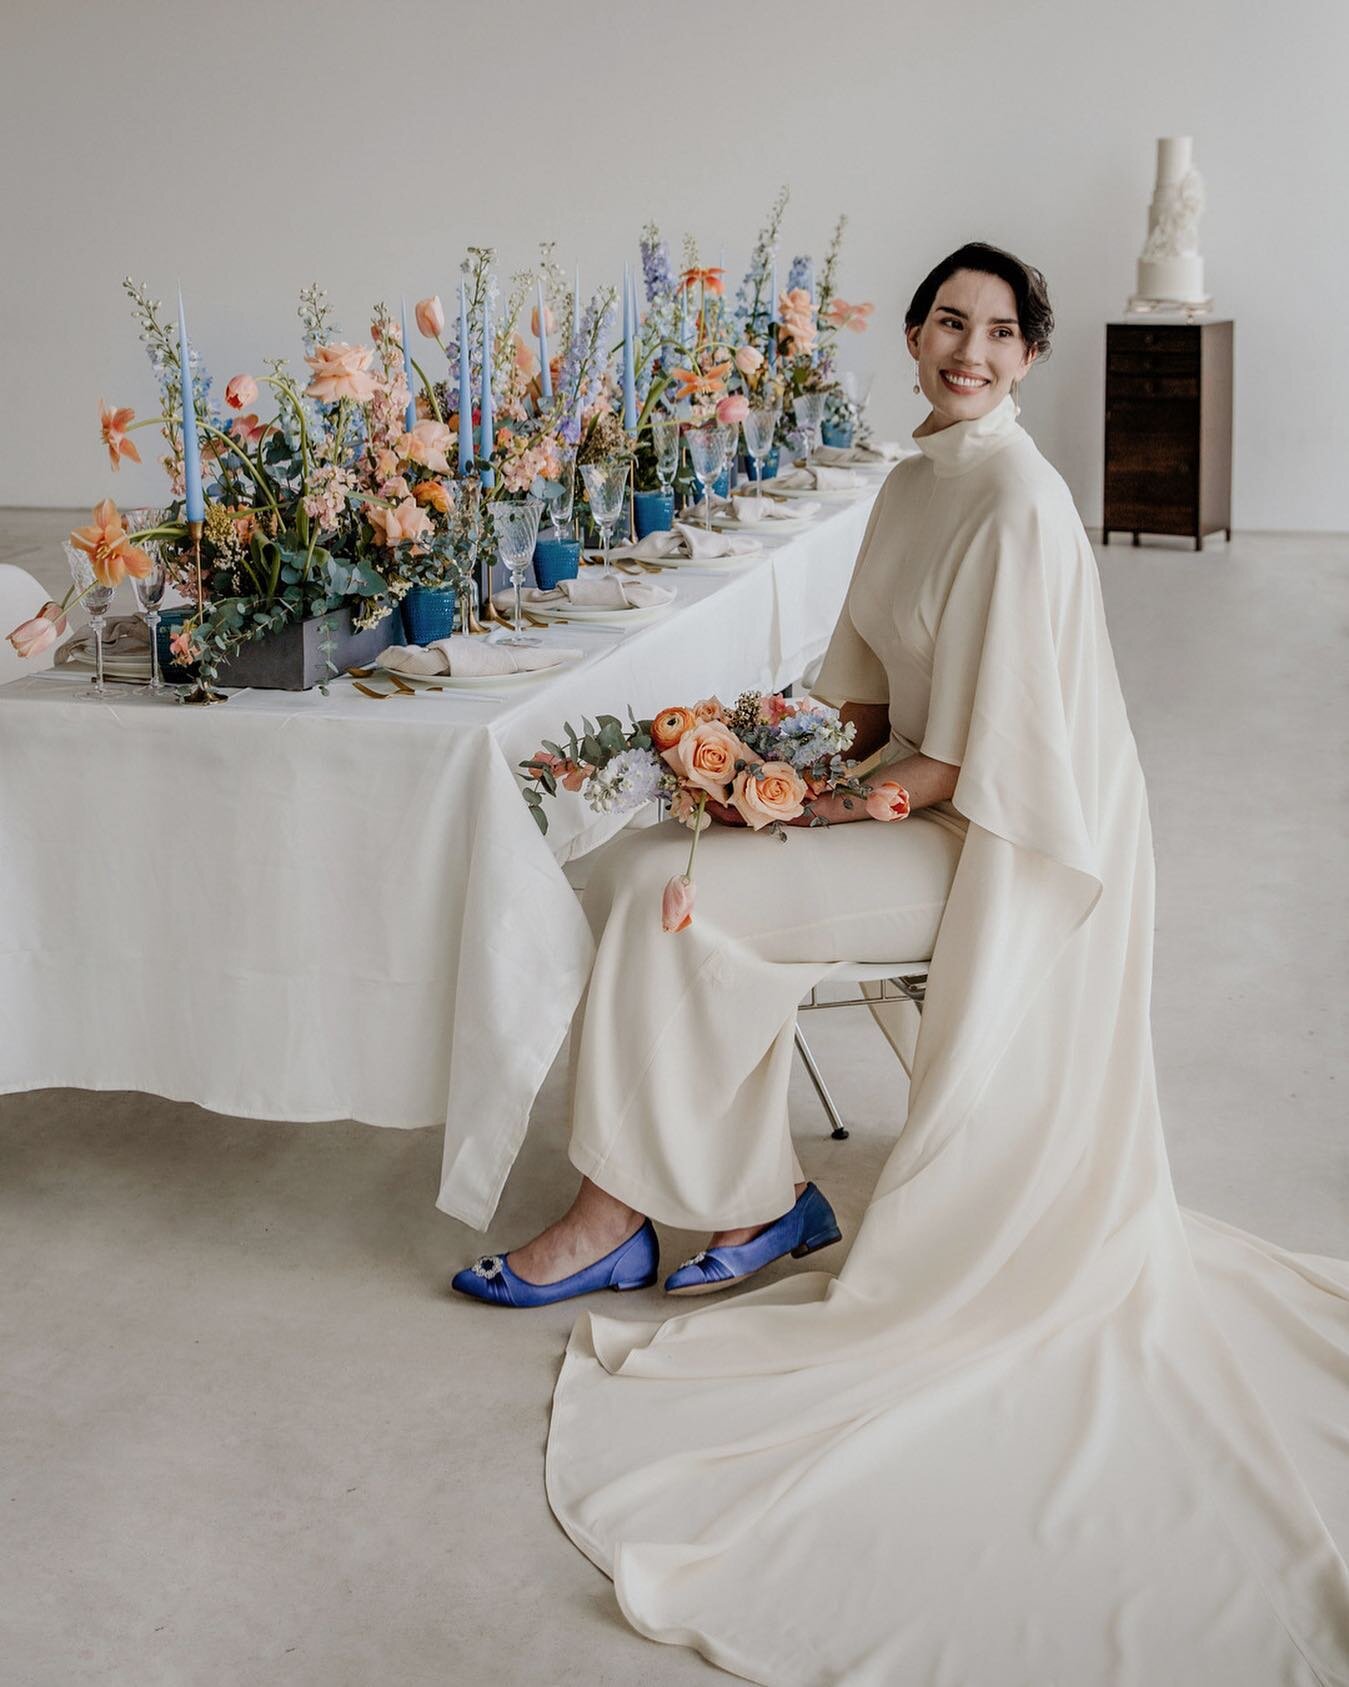 The Foyle Room @turnercontemporary 🤍 🤍 🤍 
⠀⠀⠀⠀⠀⠀⠀⠀⠀
Photography @peach_portman
Planning and styling @wildaboutyouweddings
Venue @turnercontemporary
Flowers @ultramarineflowers
Cake @choccolotties
Hair and make-up @rebecca.brownmakeup
Dress @taller